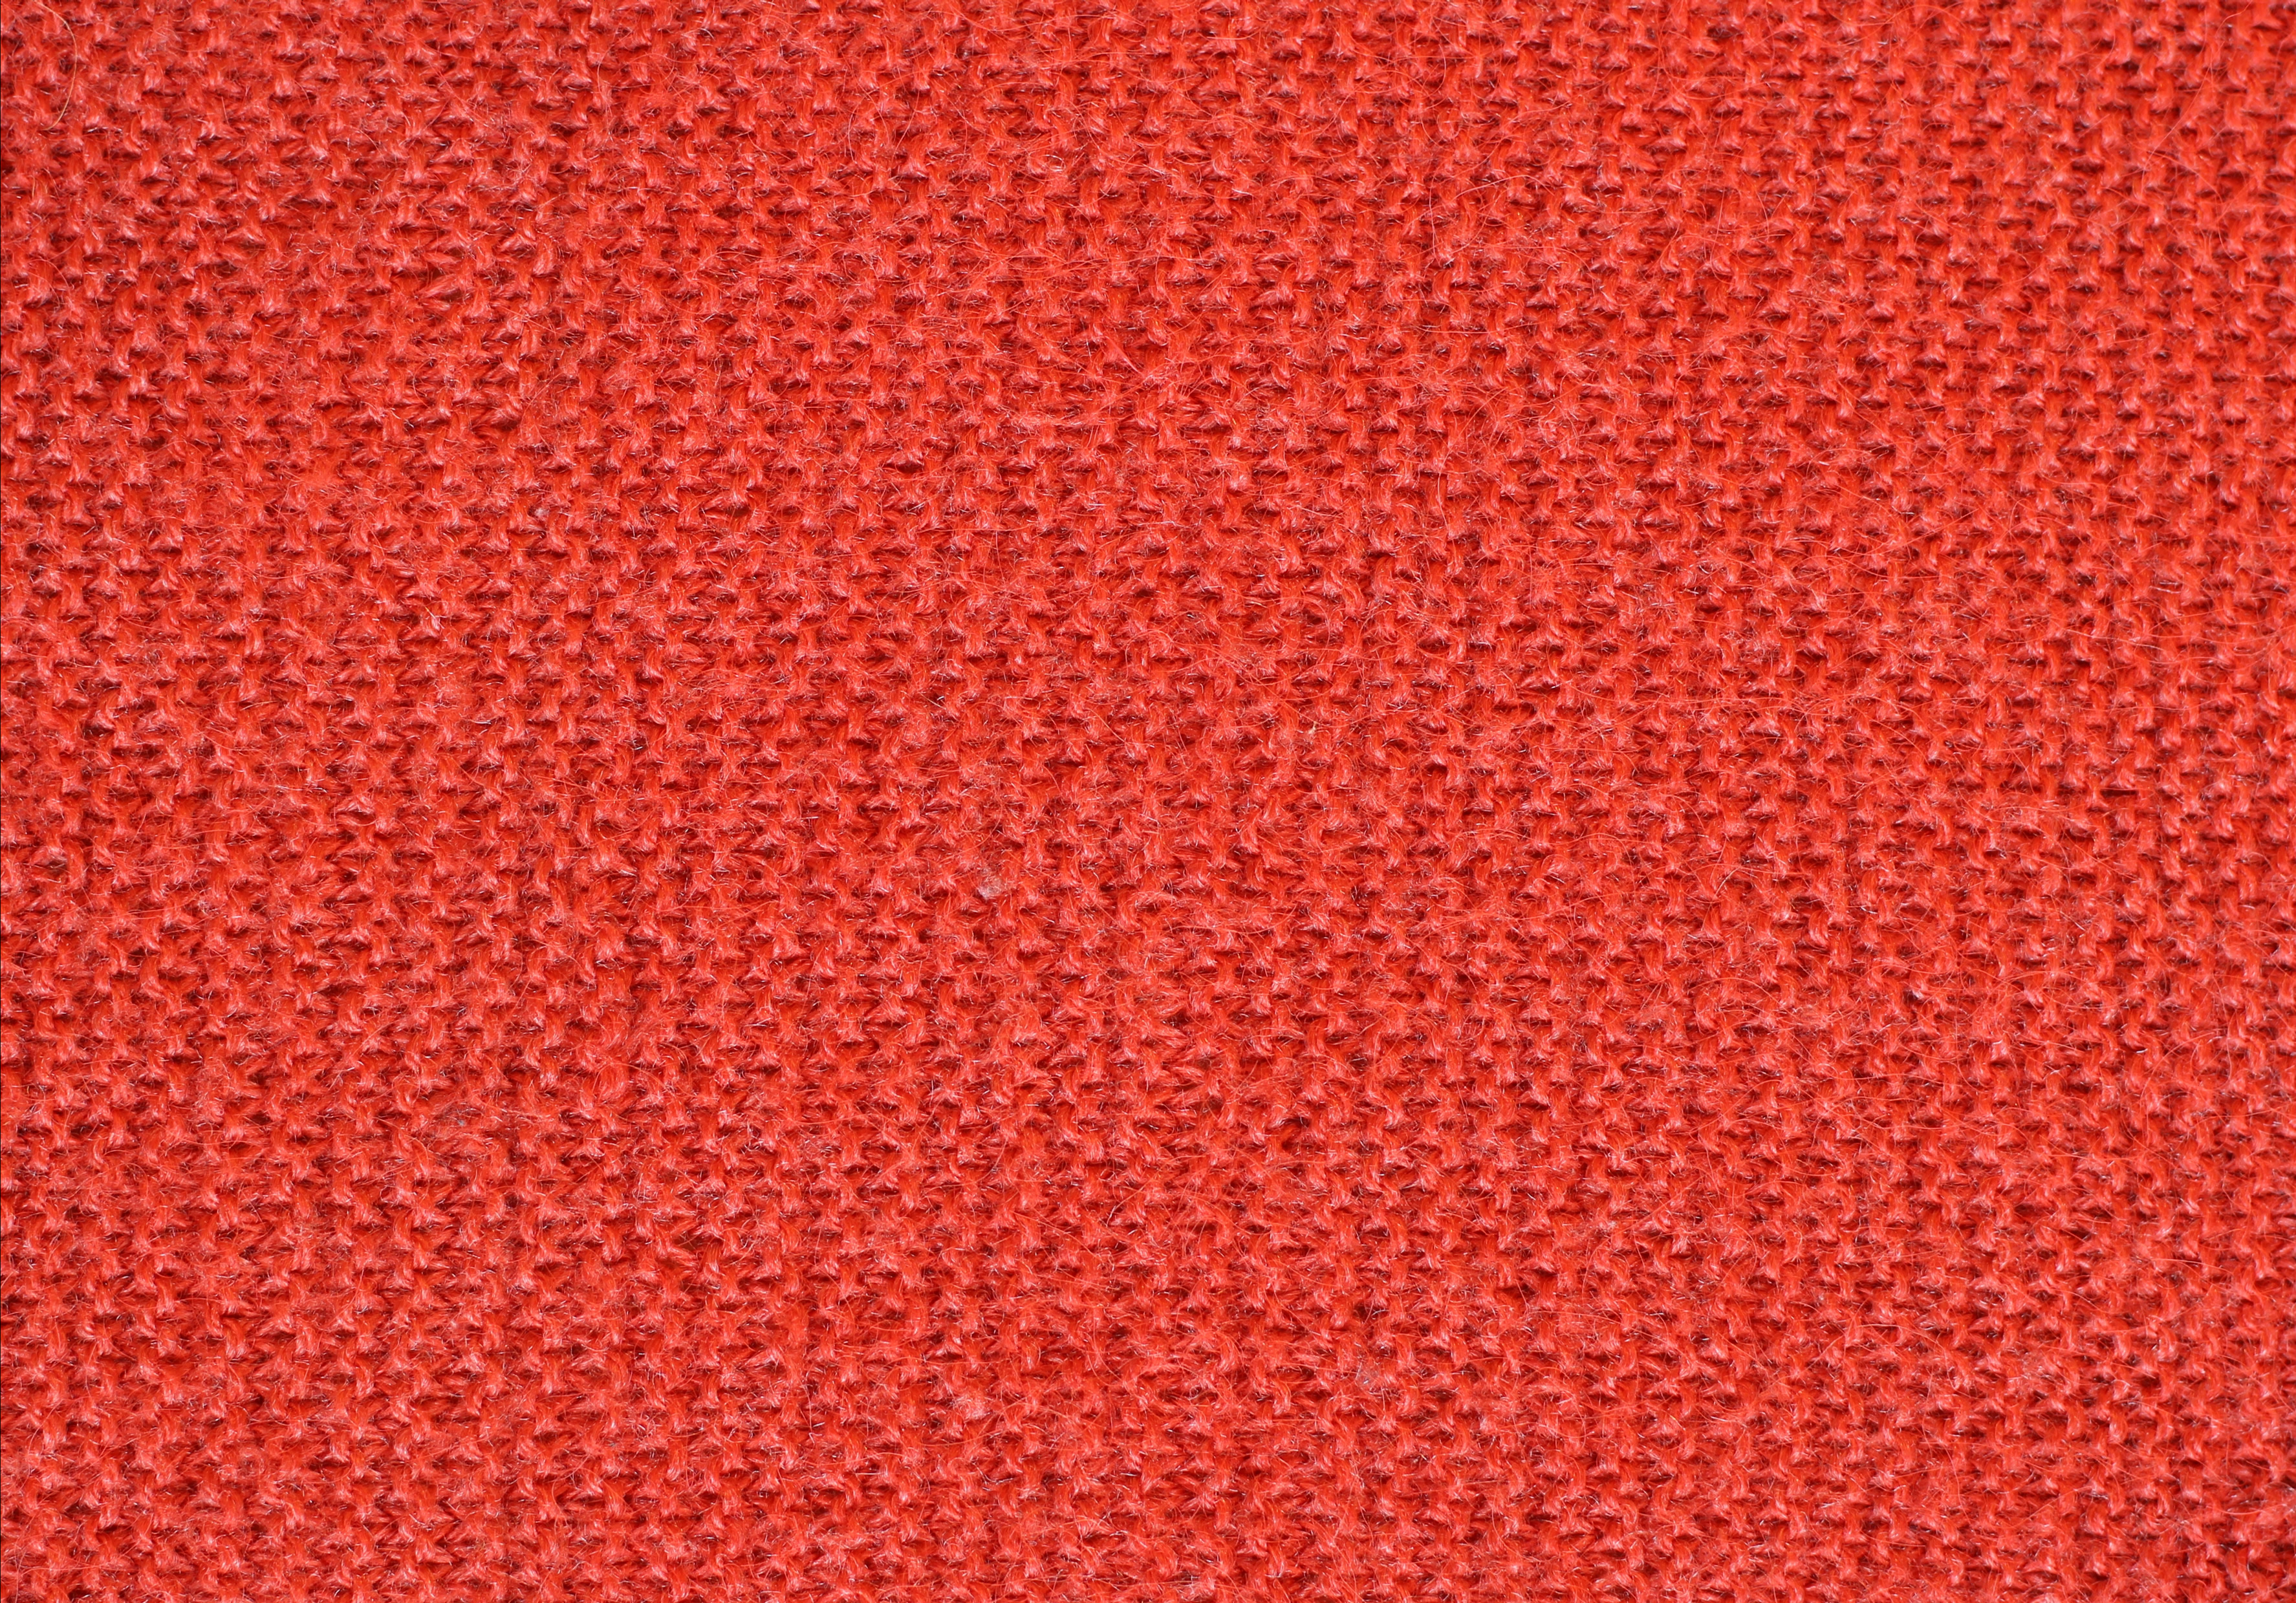 Red knitted wool texture background image